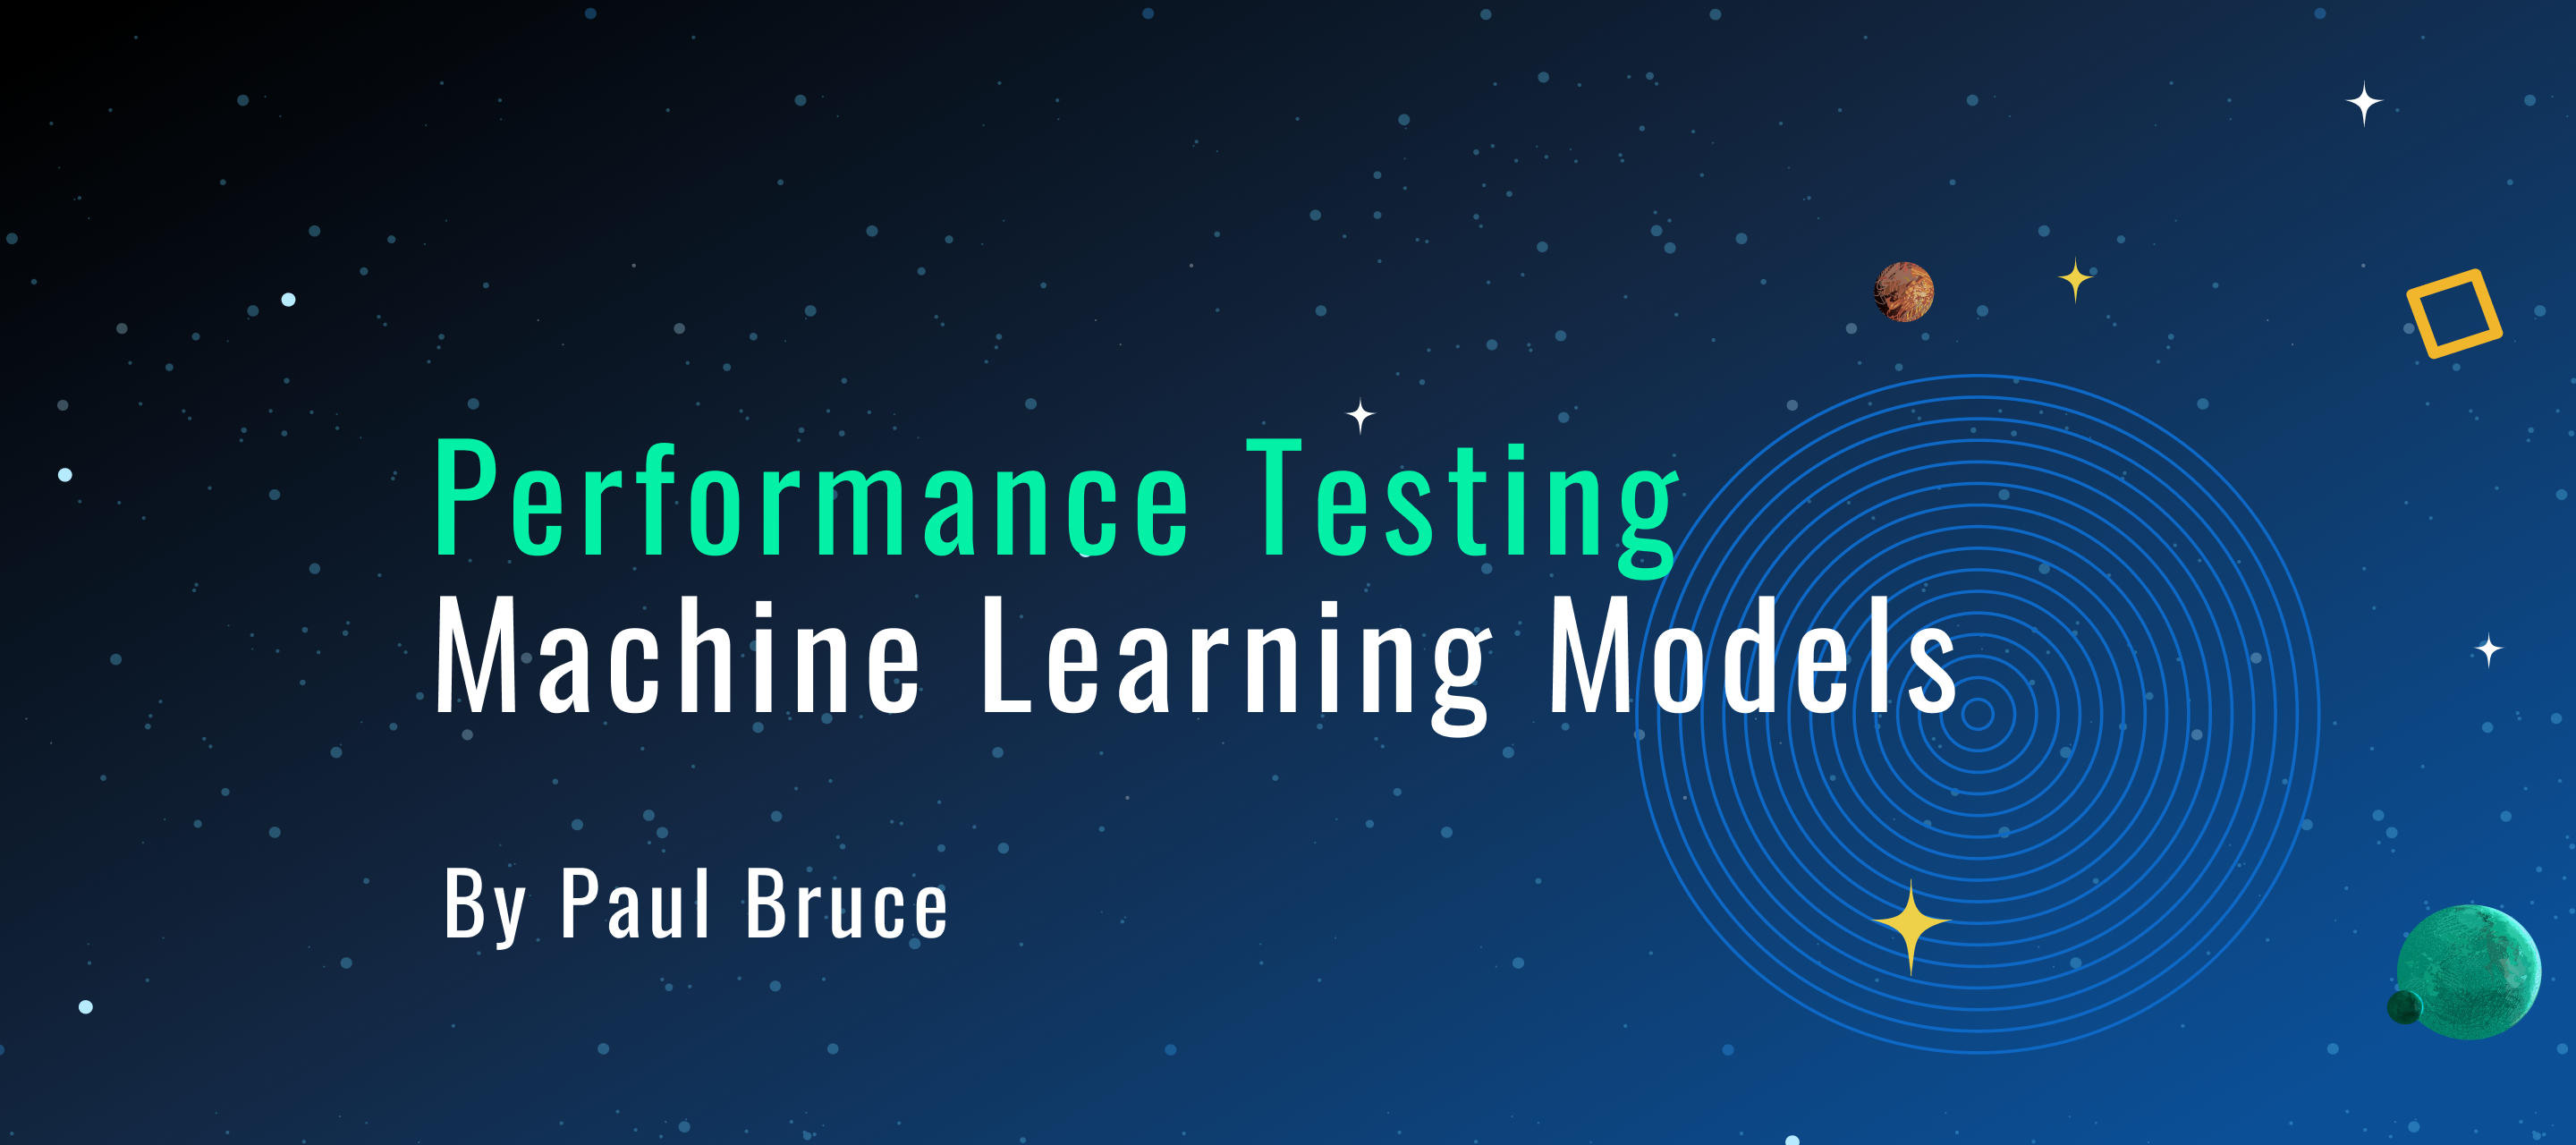 The importance of performance testing machine learning models